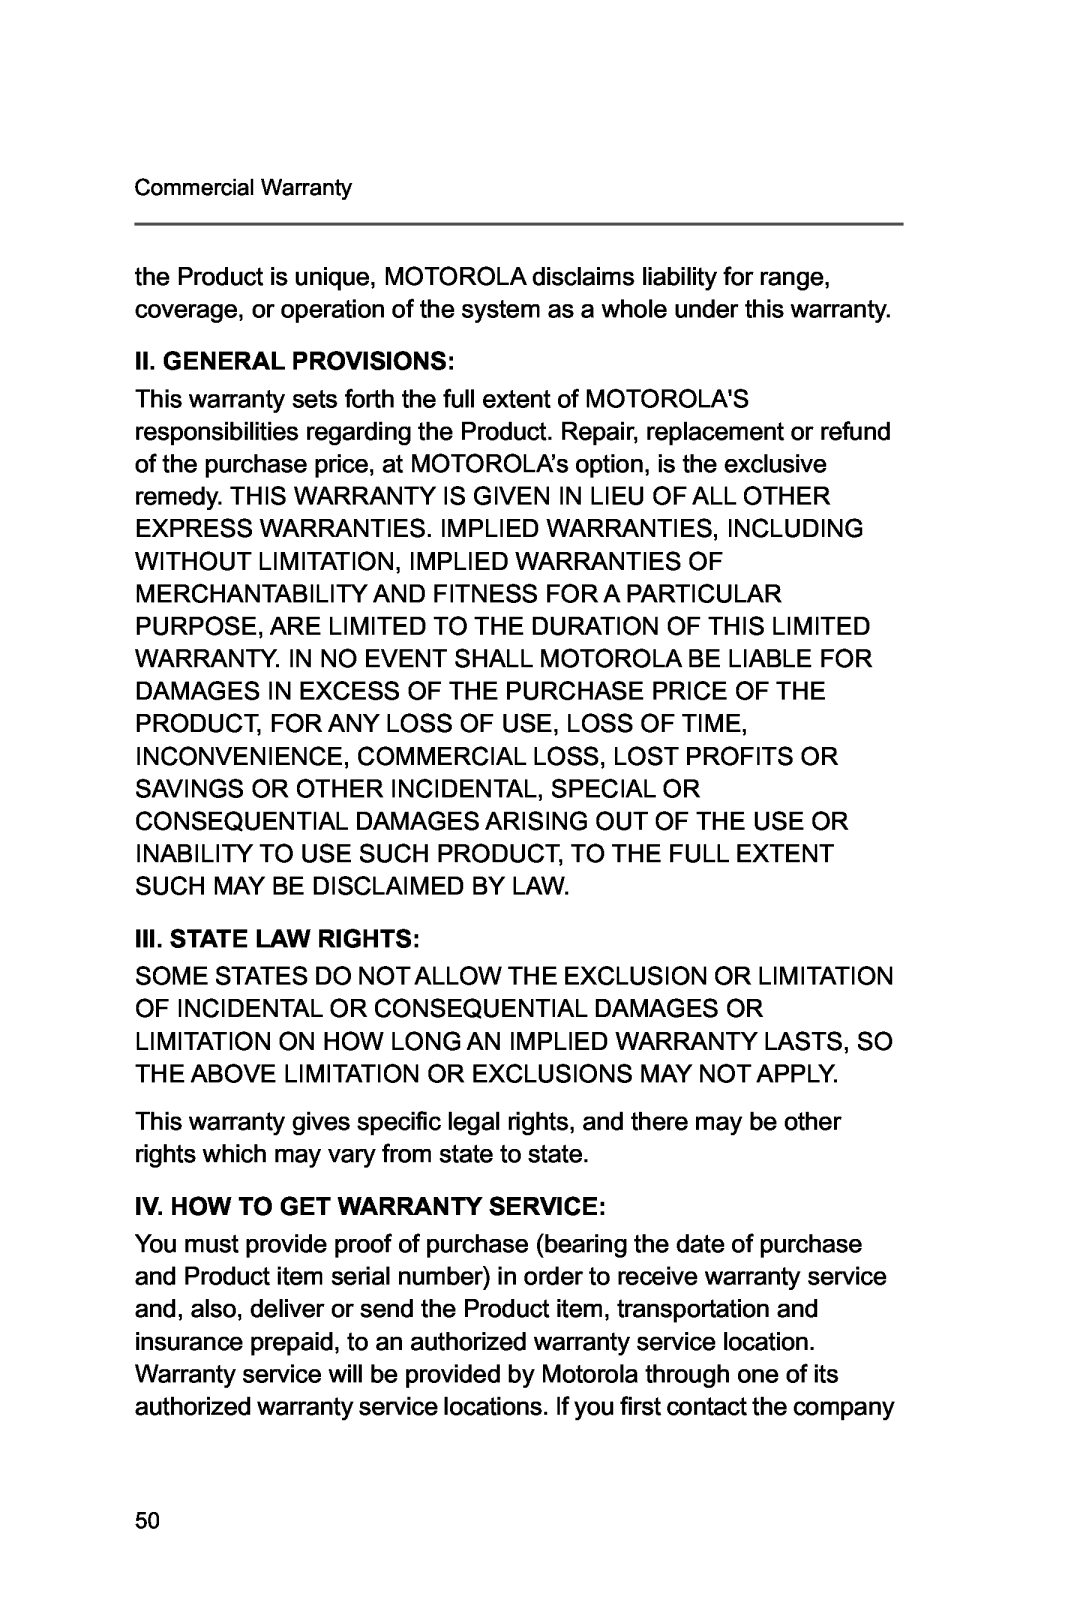 Motorola XTSTM 1500 Ii. General Provisions, Iii. State Law Rights, Iv. How To Get Warranty Service, Commercial Warranty 